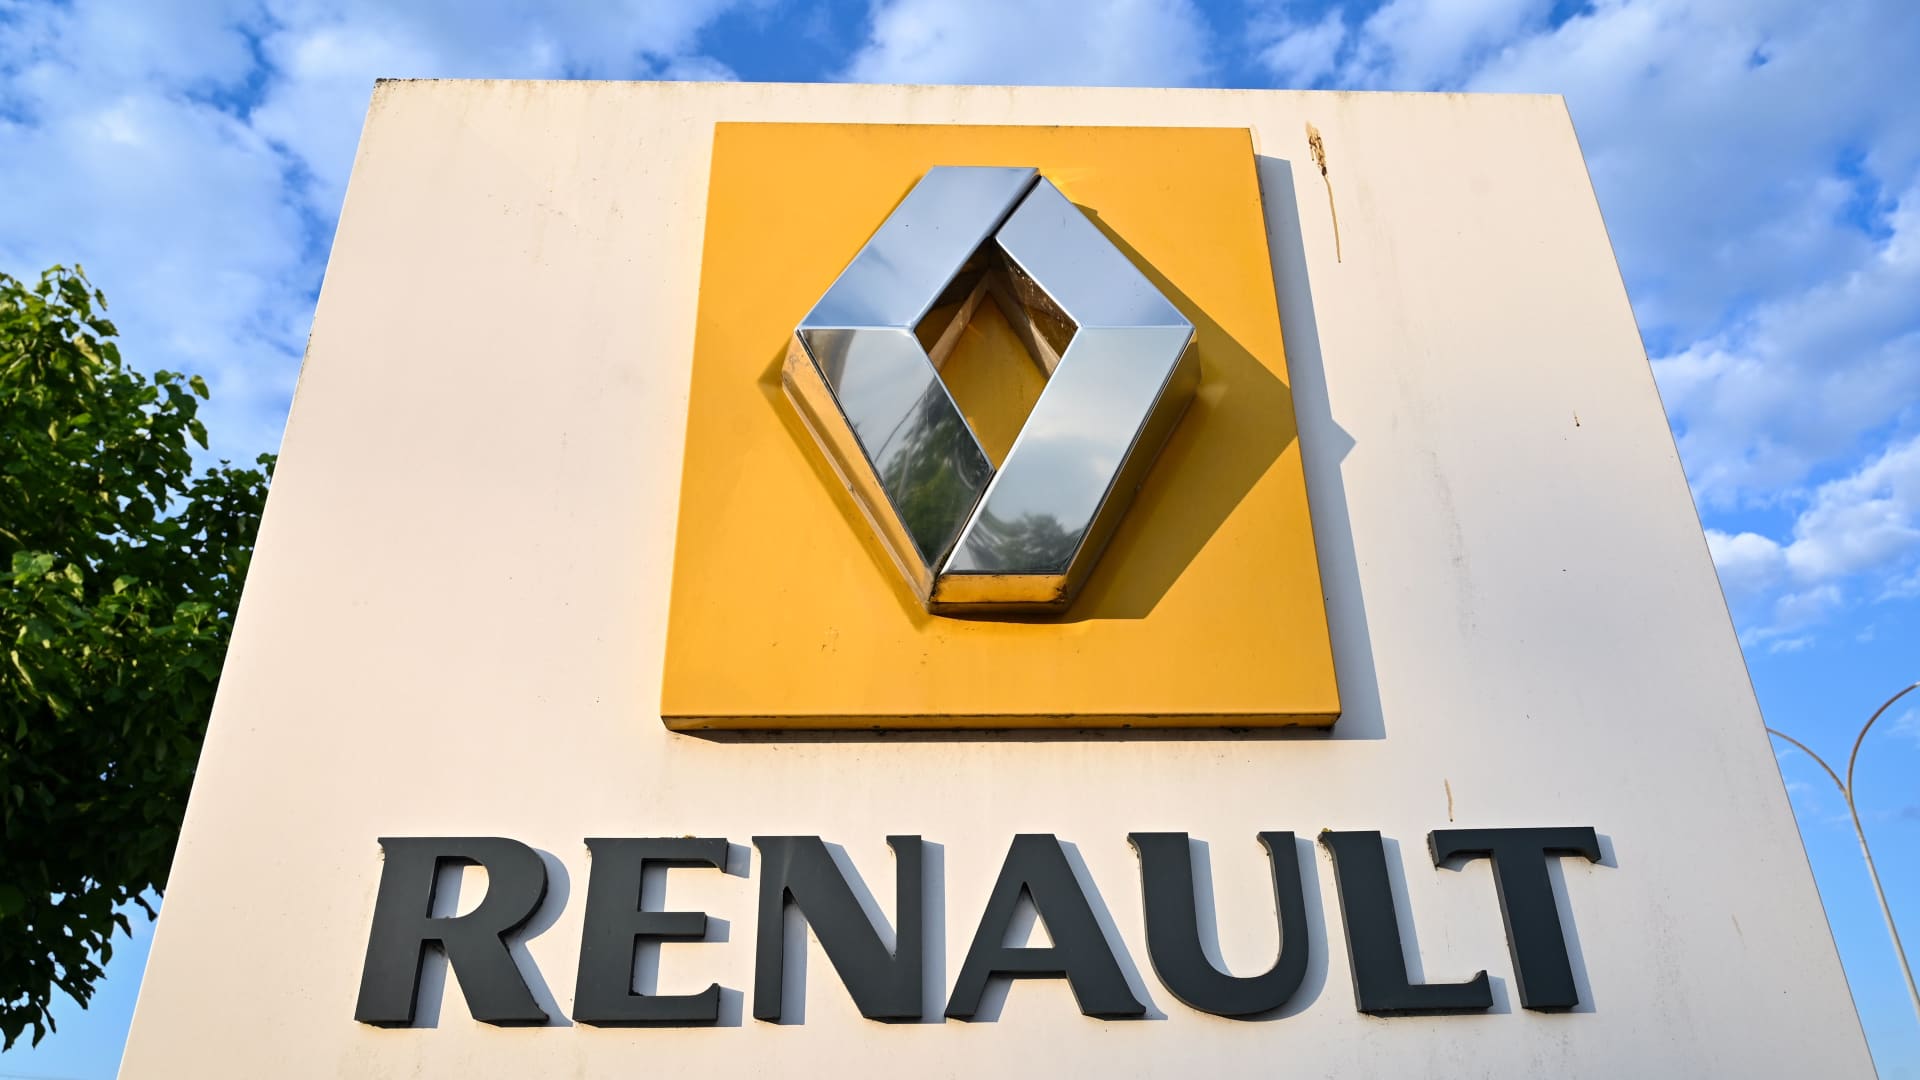 Renault CEO questions wisdom of electric vehicle price cuts